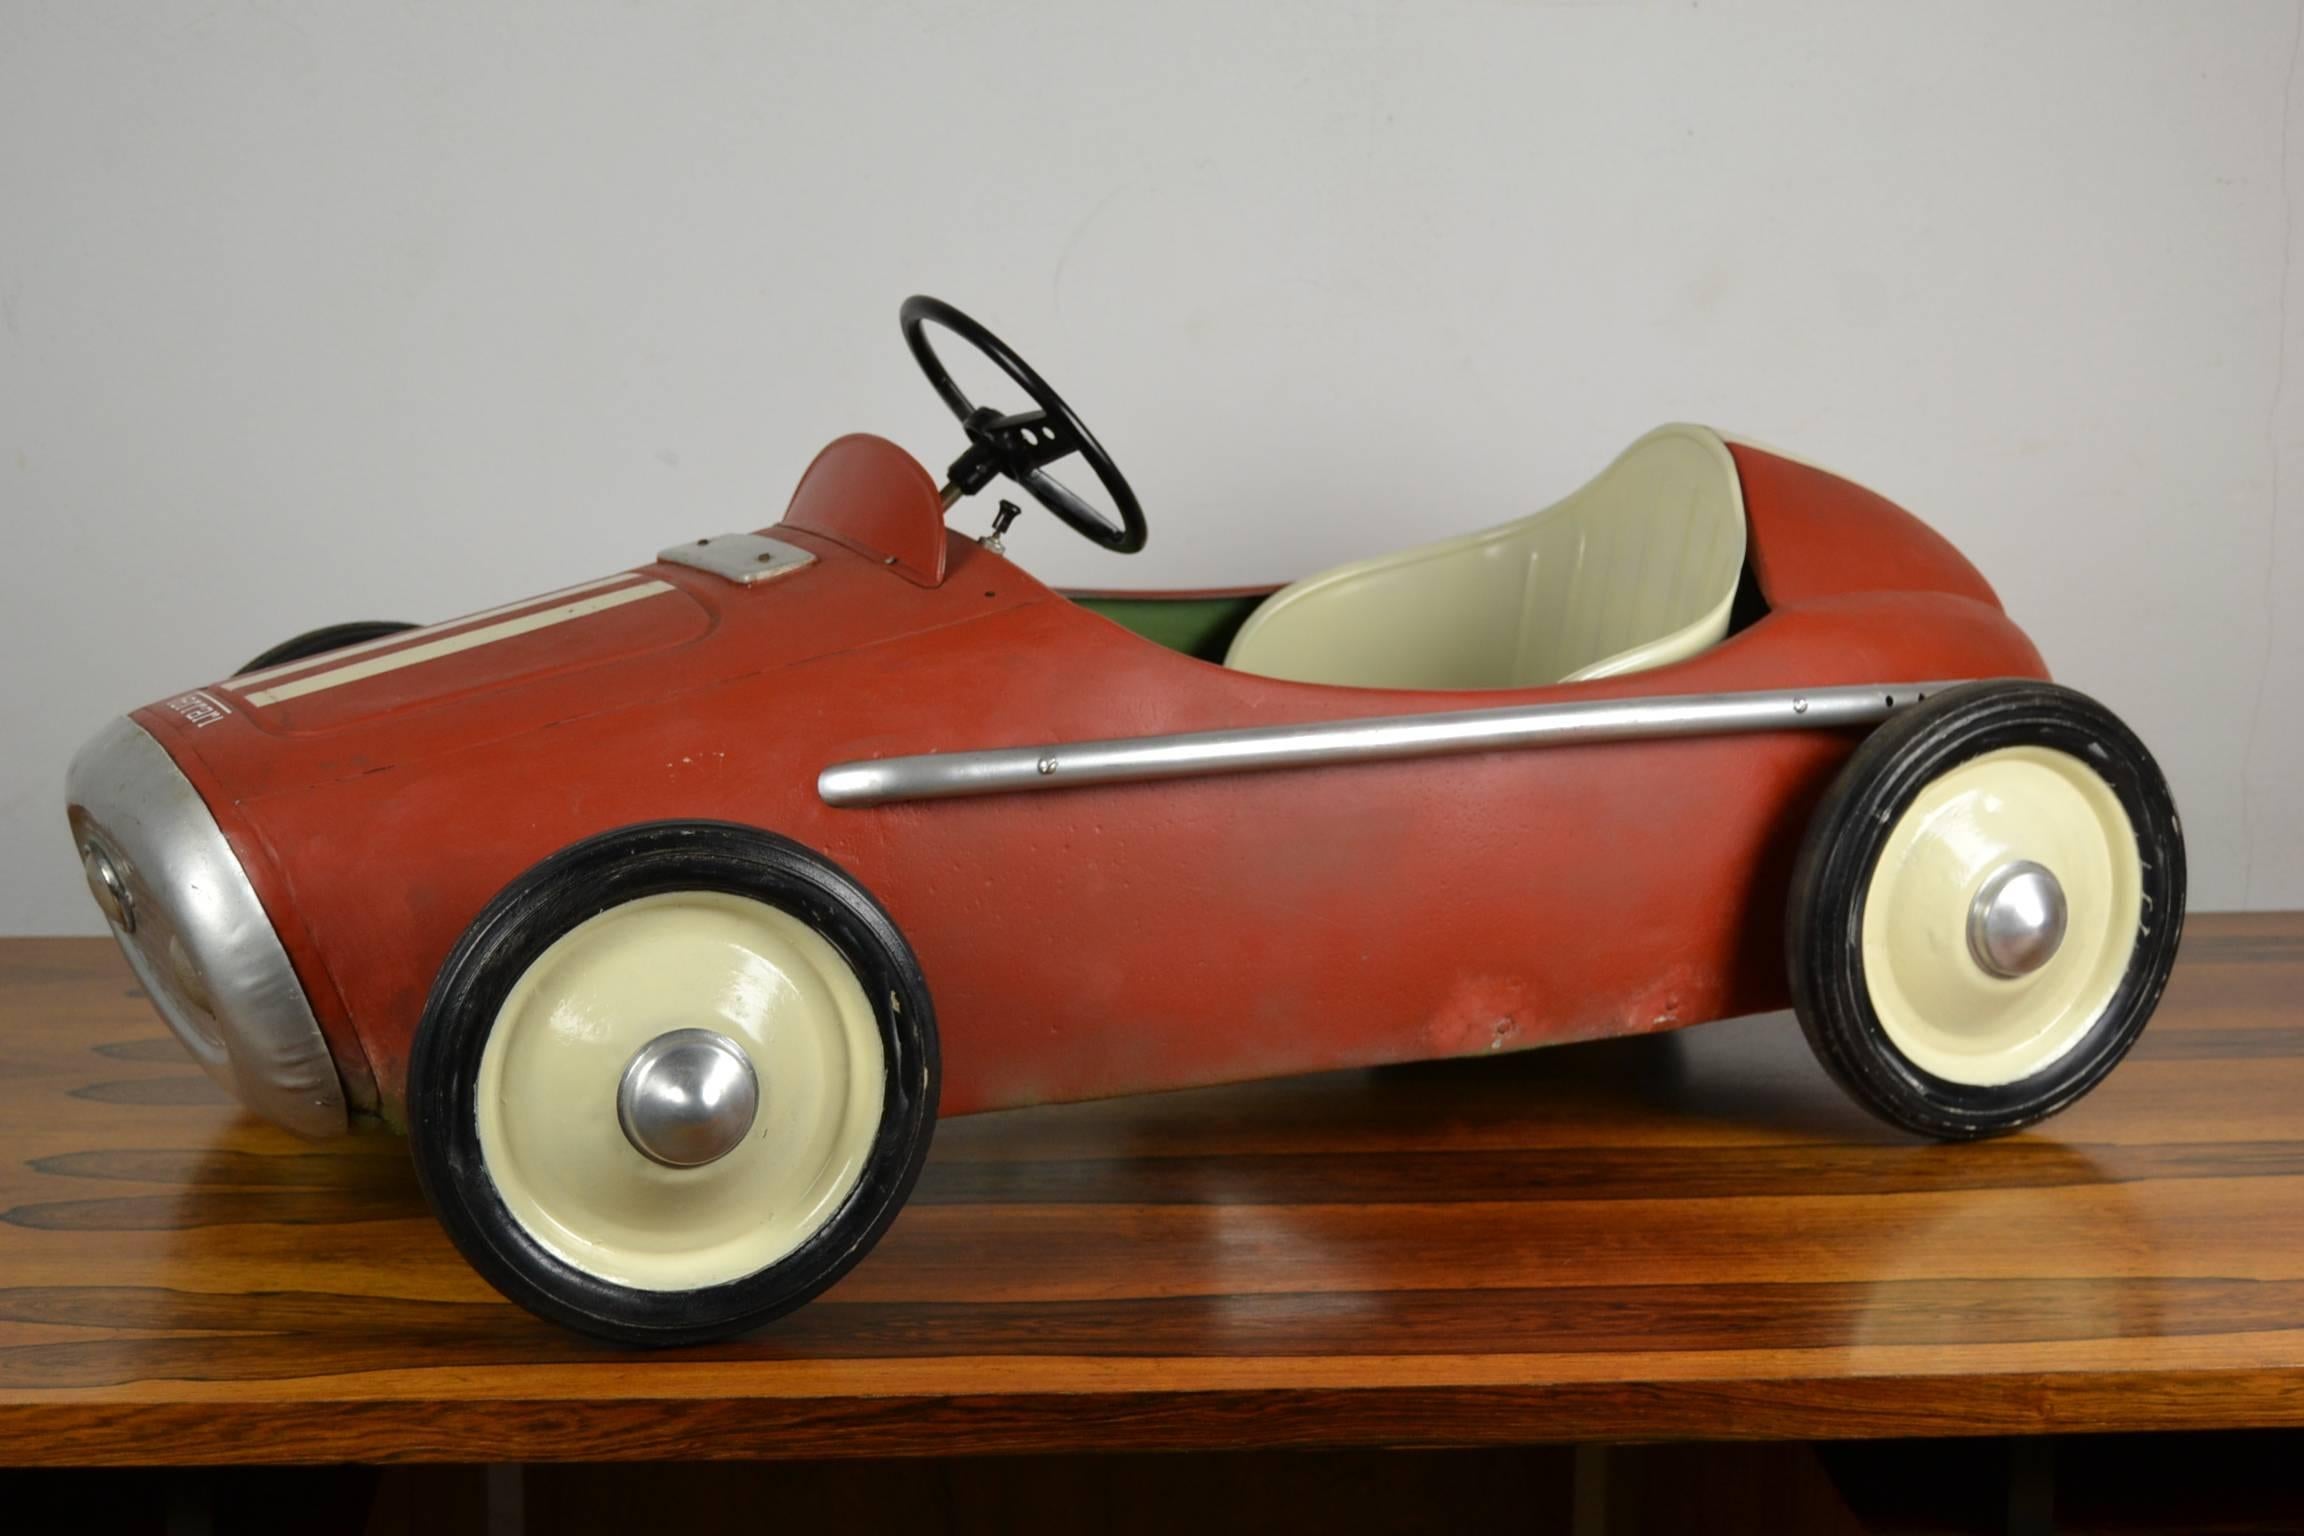 Vintage children's Ferrari racer pedal car type Indy - made by M.G. / Morellet et Guérineau France - from the late 1950s.
This vintage toy car has an old repainting, frosted colors red with white stripes.
For pedal car collector - decoration and